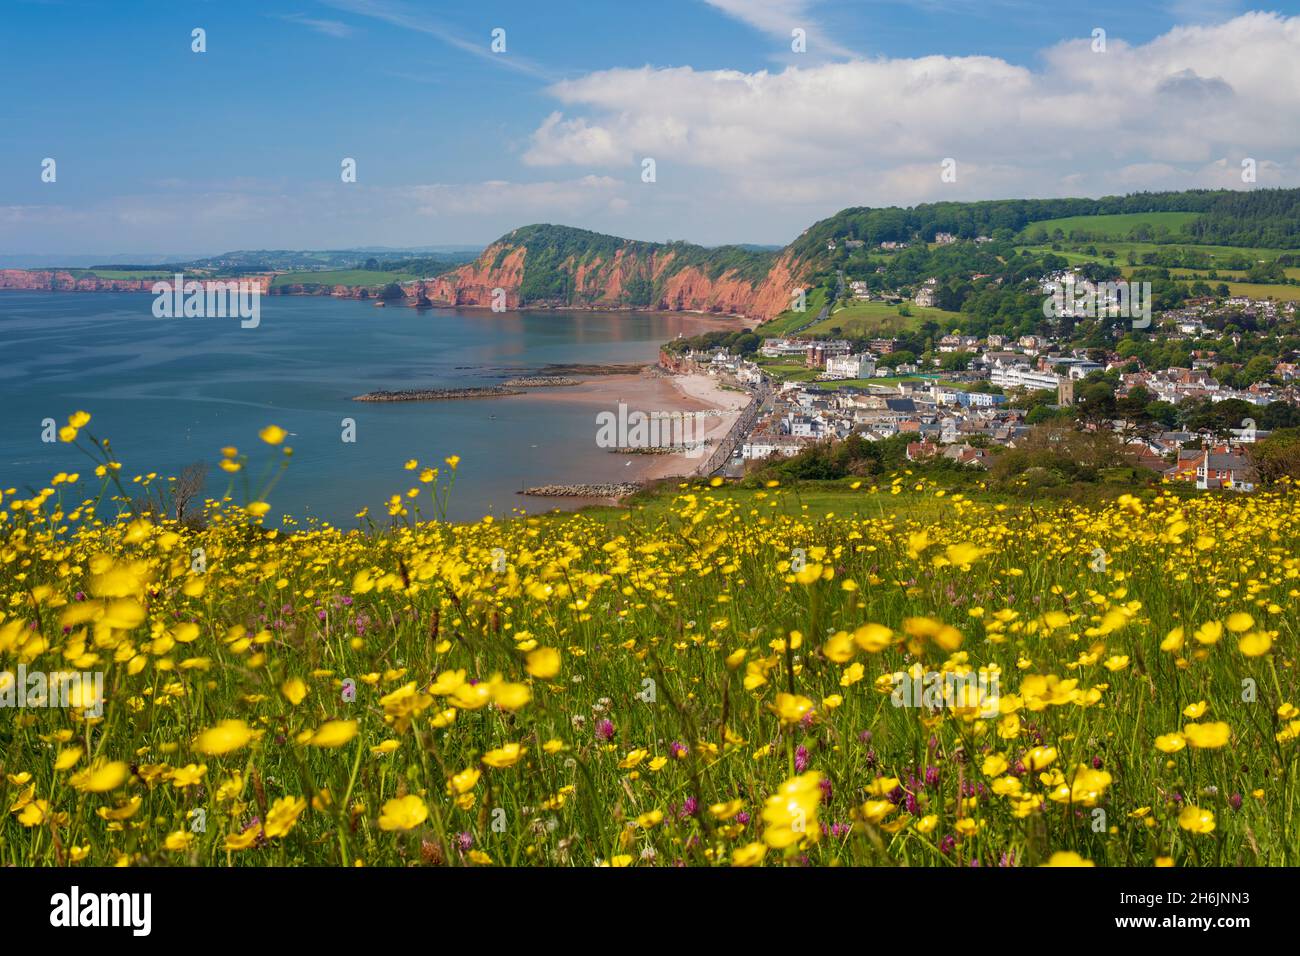 Sidmouth and red cliffs from Salcombe Hill with buttercups, Sidmouth, Jurassic Coast, UNESCO World Heritage Site, Devon, England, United Kingdom Stock Photo